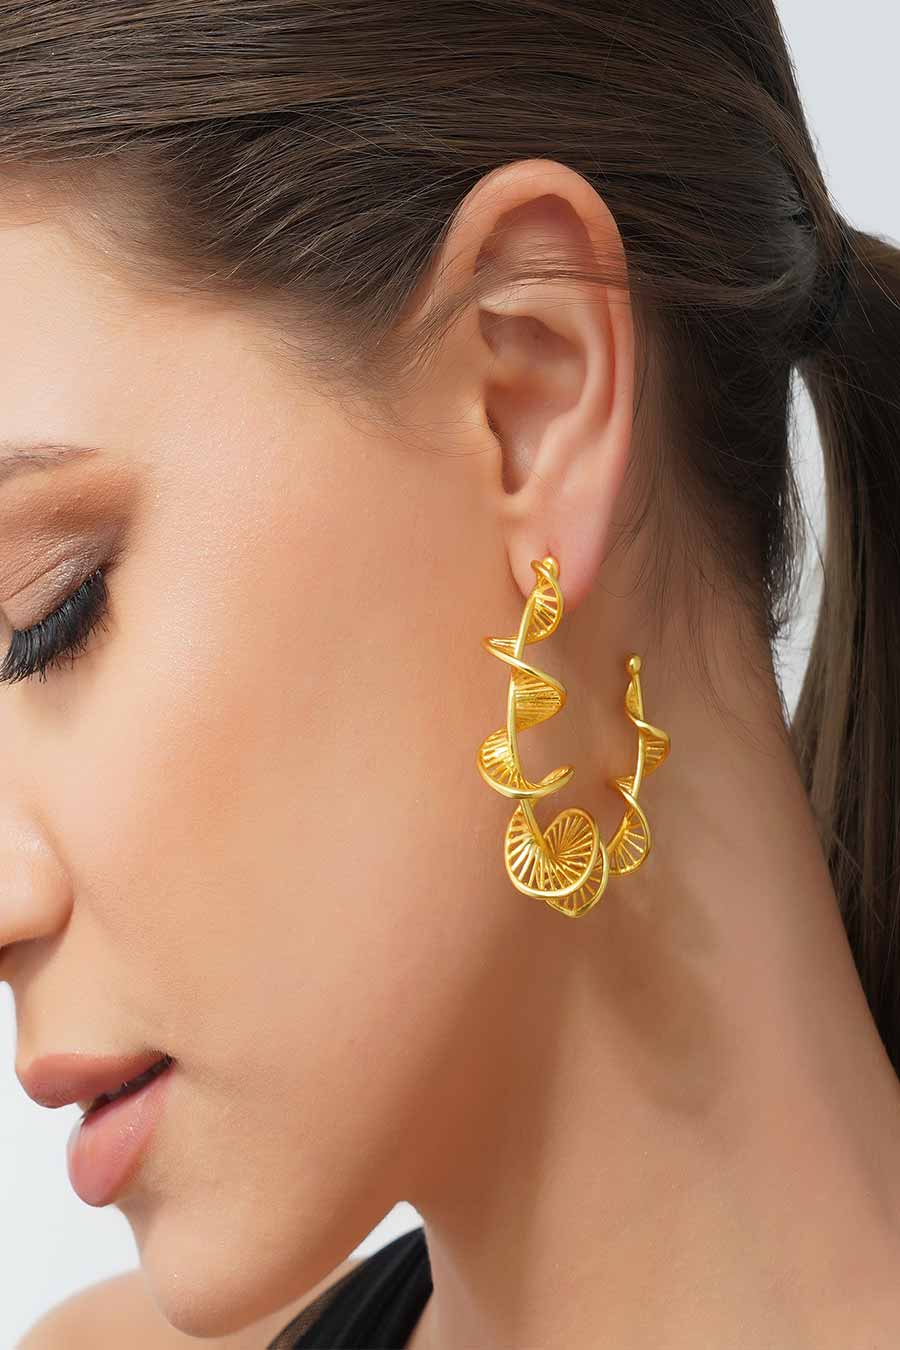 Magic Moves - Gold Plated Hoops Earrings